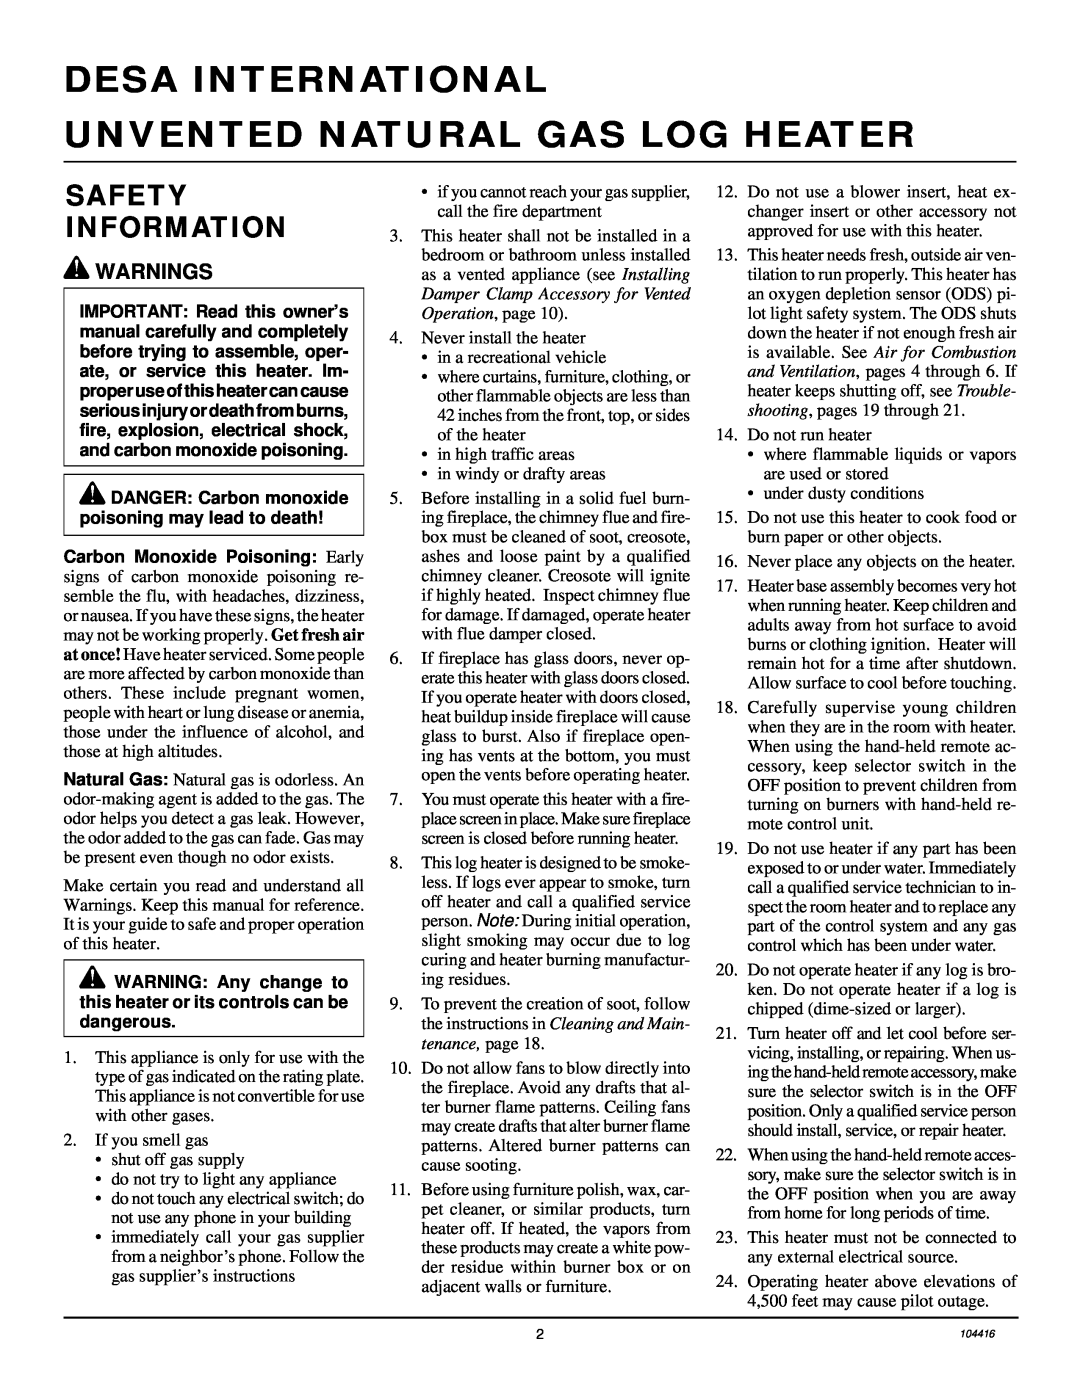 Desa VS18NRA, CFS18NRA, VS24NRA, VS30NRA Desa International, Unvented Natural Gas Log Heater, Safety Information, Warnings 